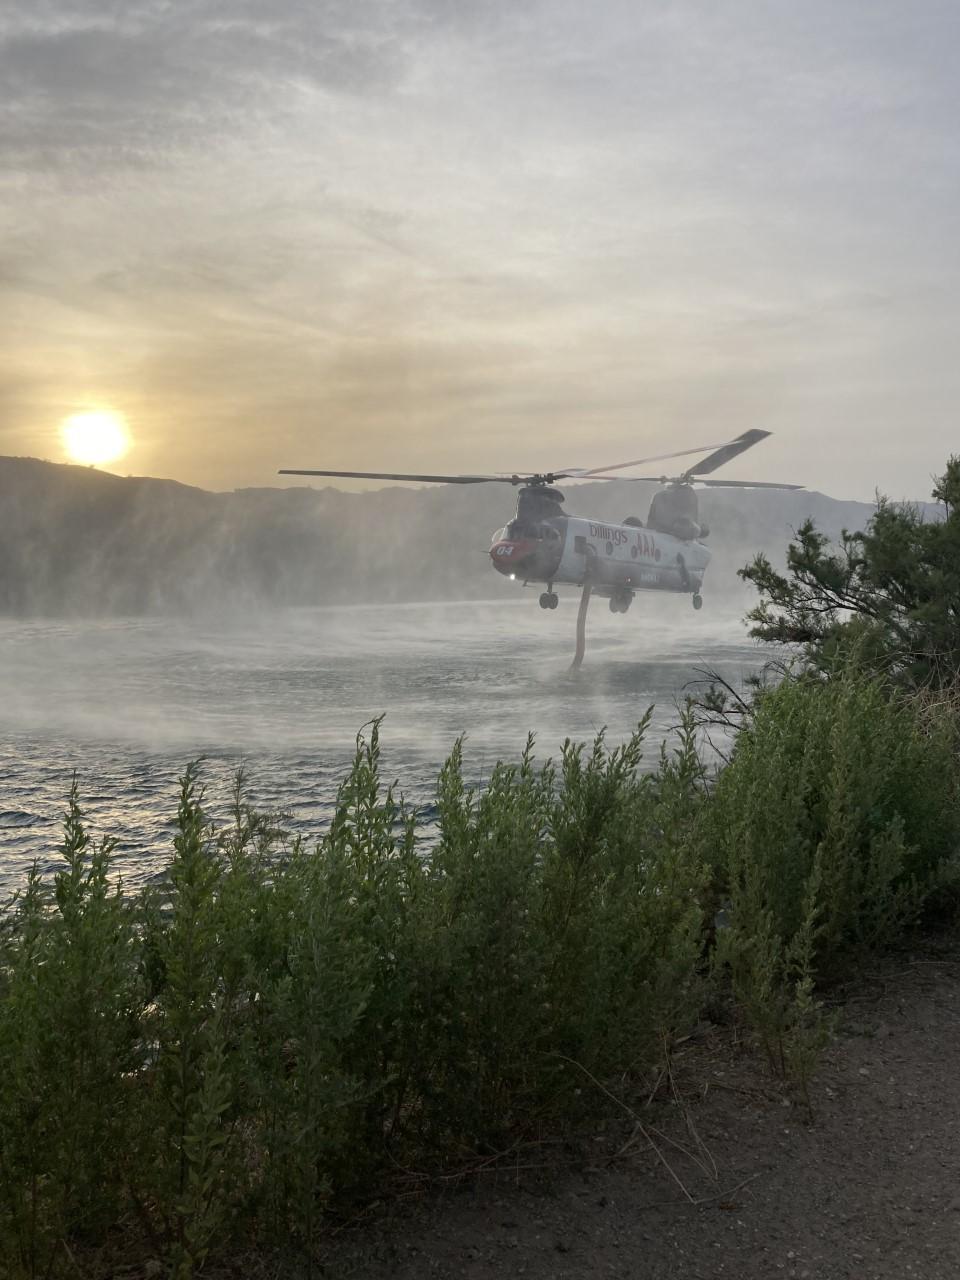 Large helicopter hovers over river, green grass in foreground, river in background